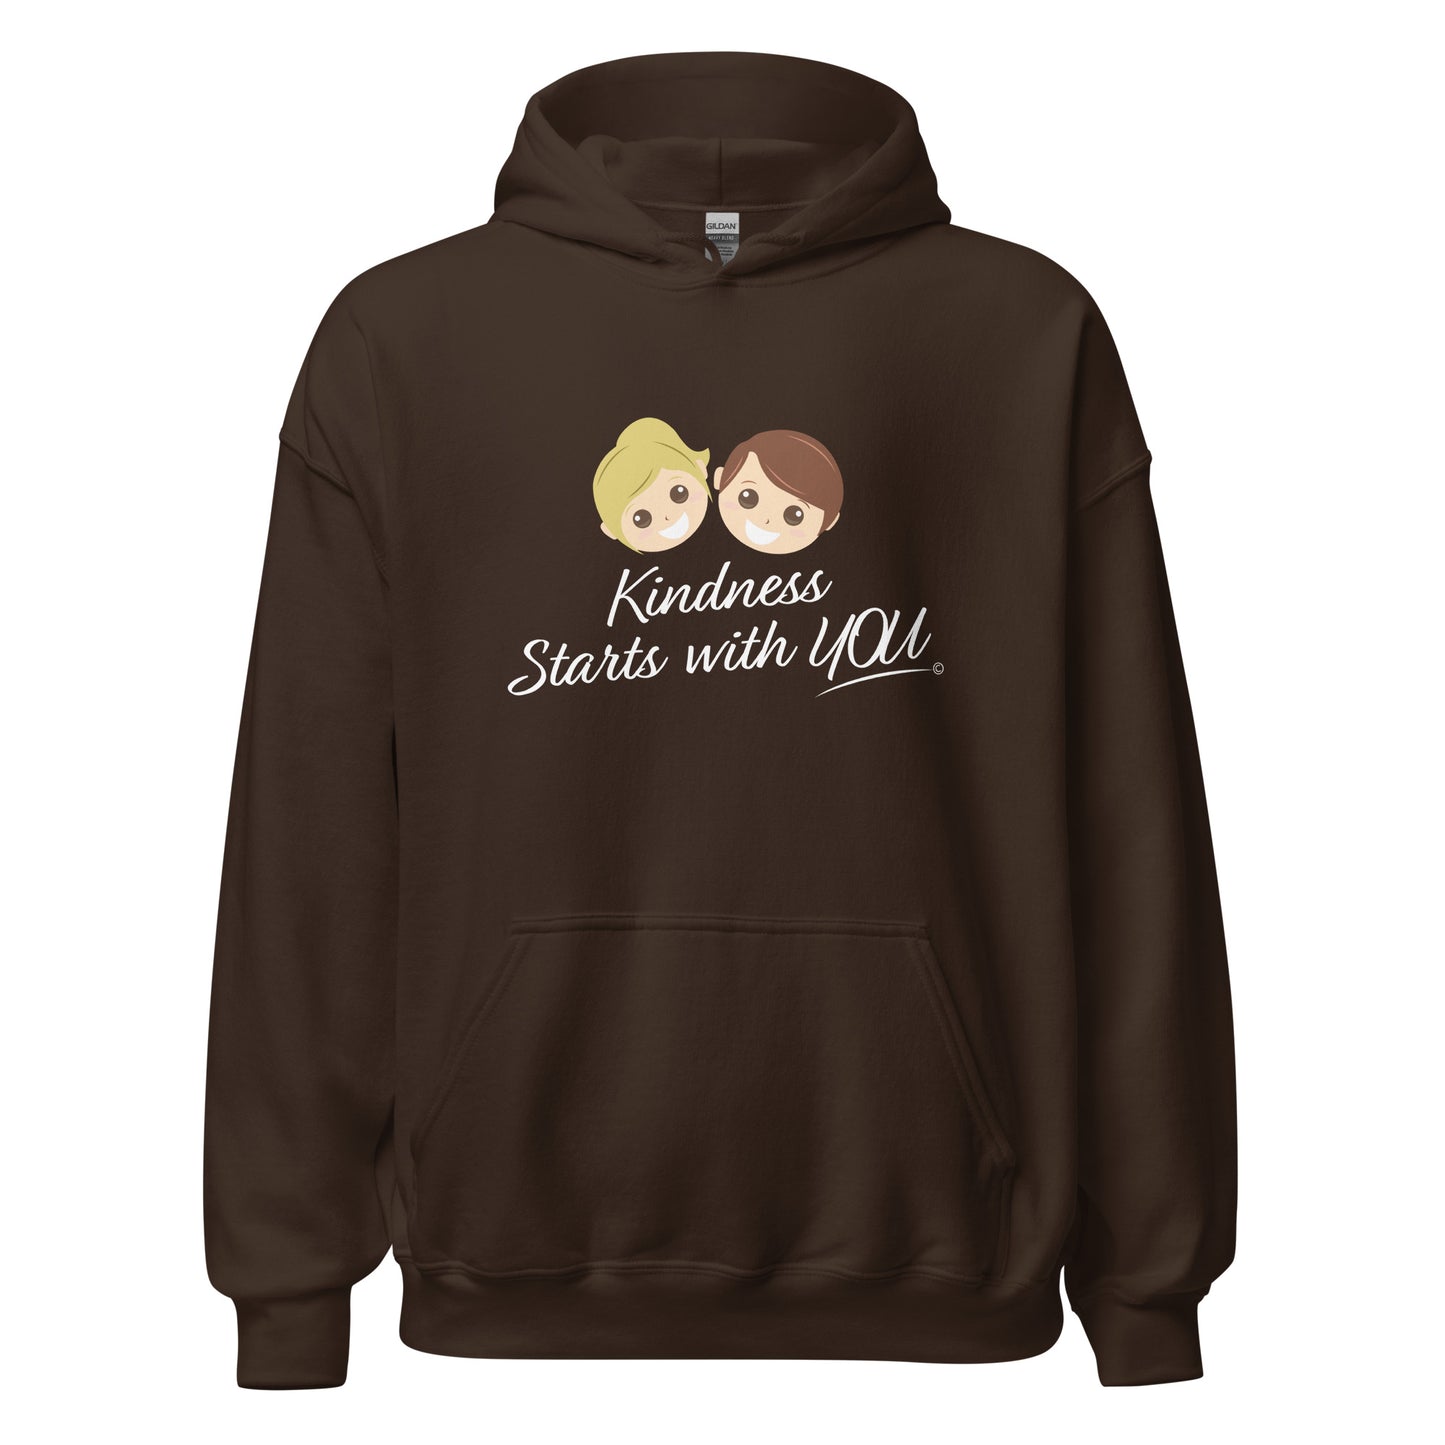 A cozy unisex hoodie in dark chocolate, featuring the uplifting quote 'Kindness Starts with You' in bold lettering.